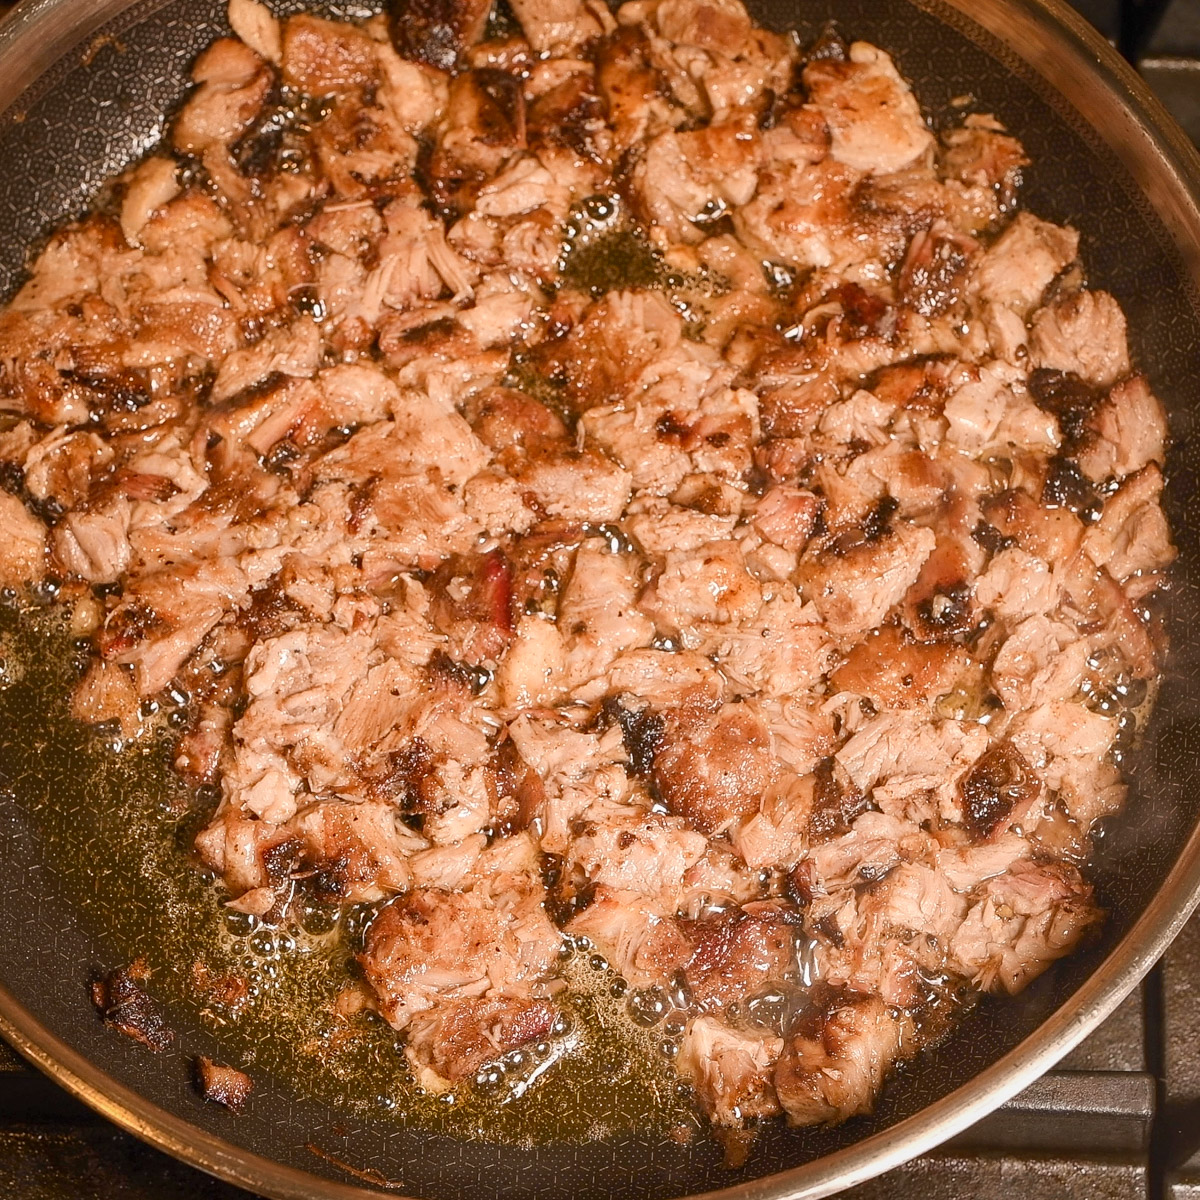 Sear the carnitas meat in a skillet over medium-high heat.